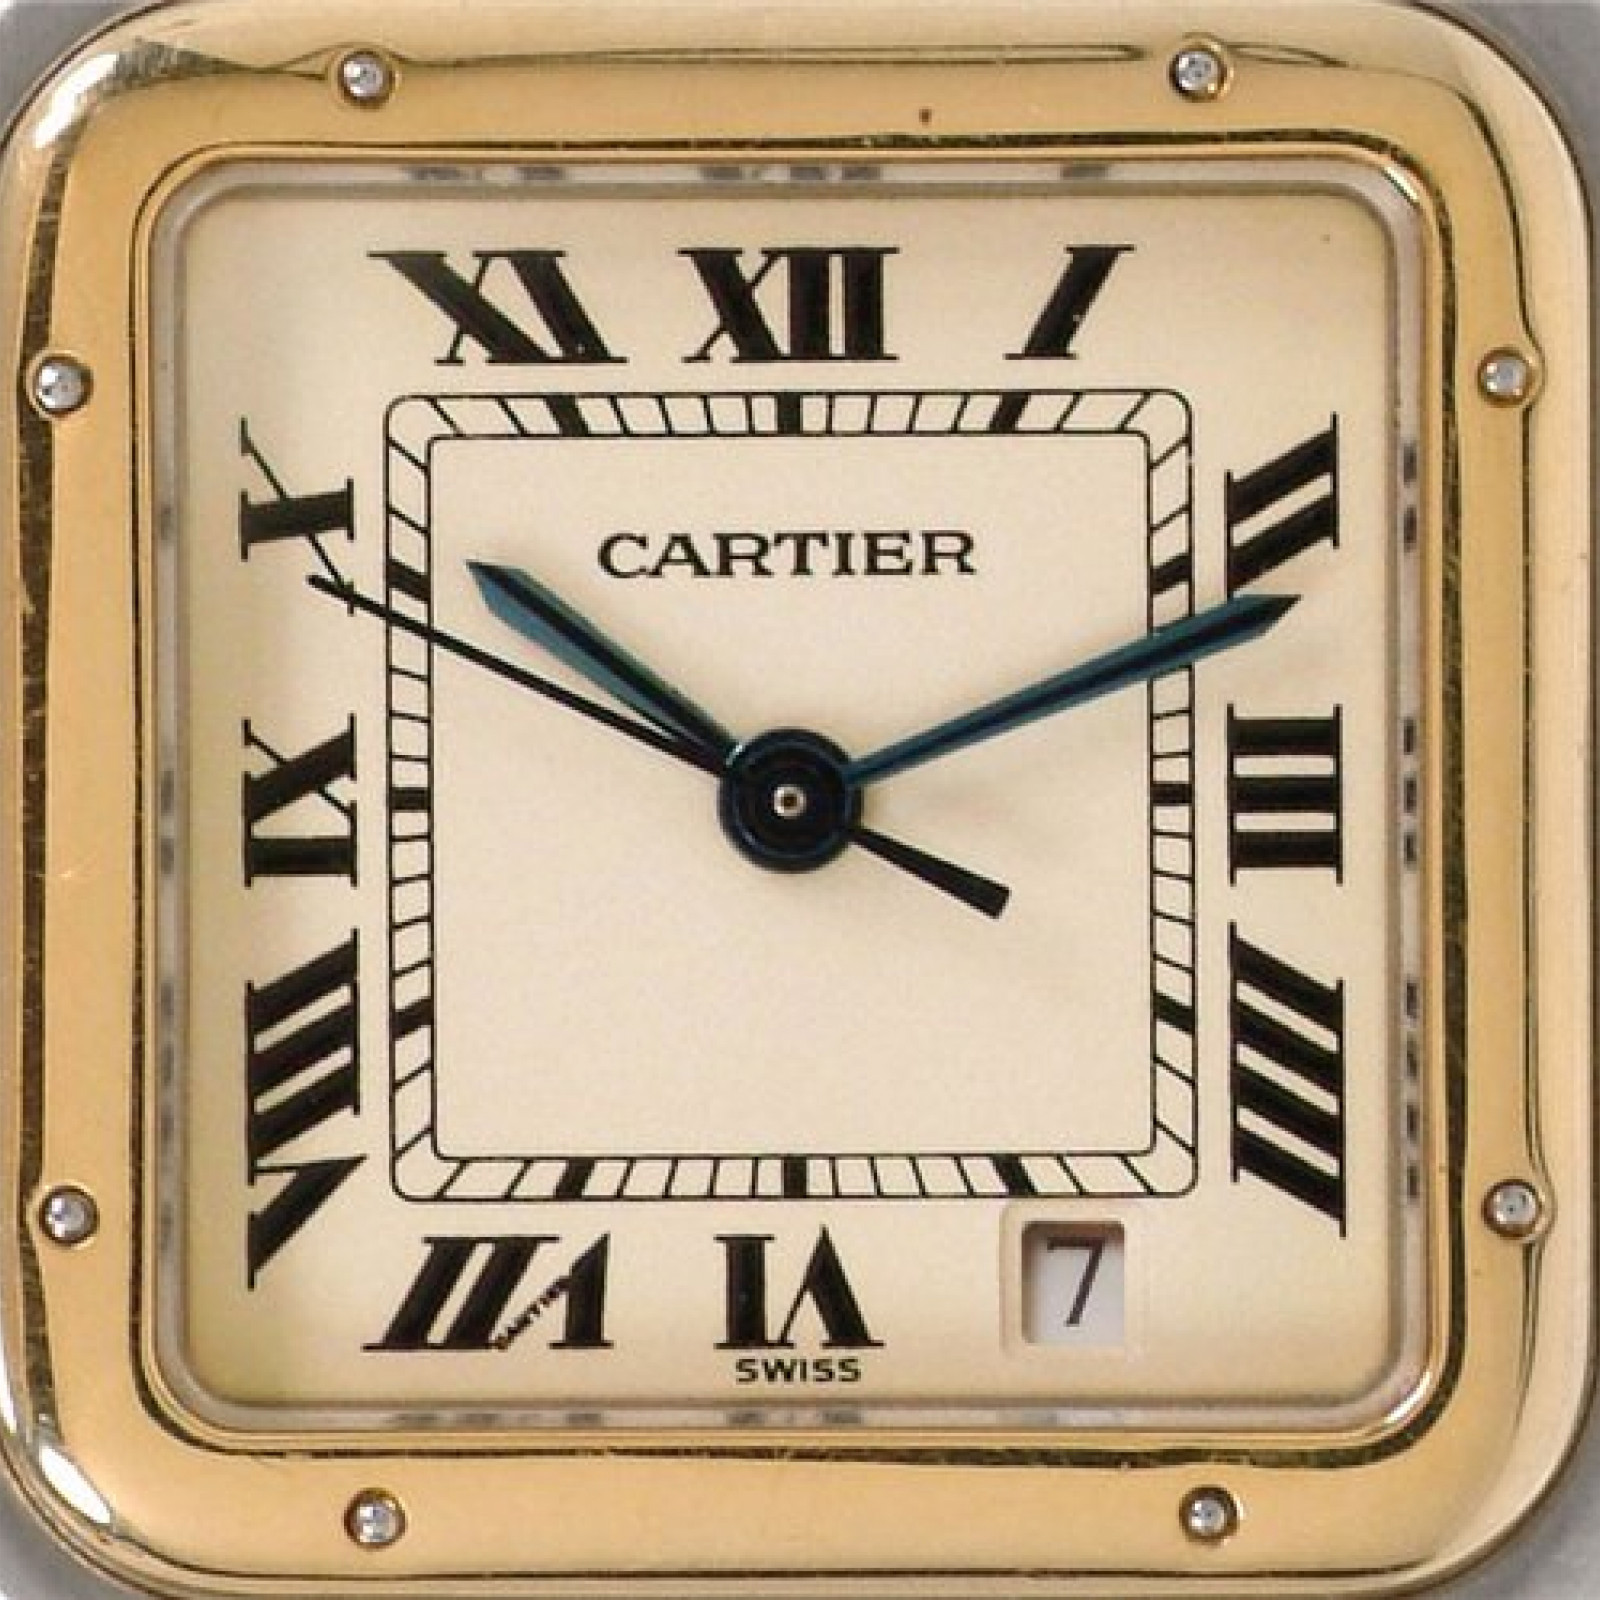 Used Cartier Tank Panthere W25028B6